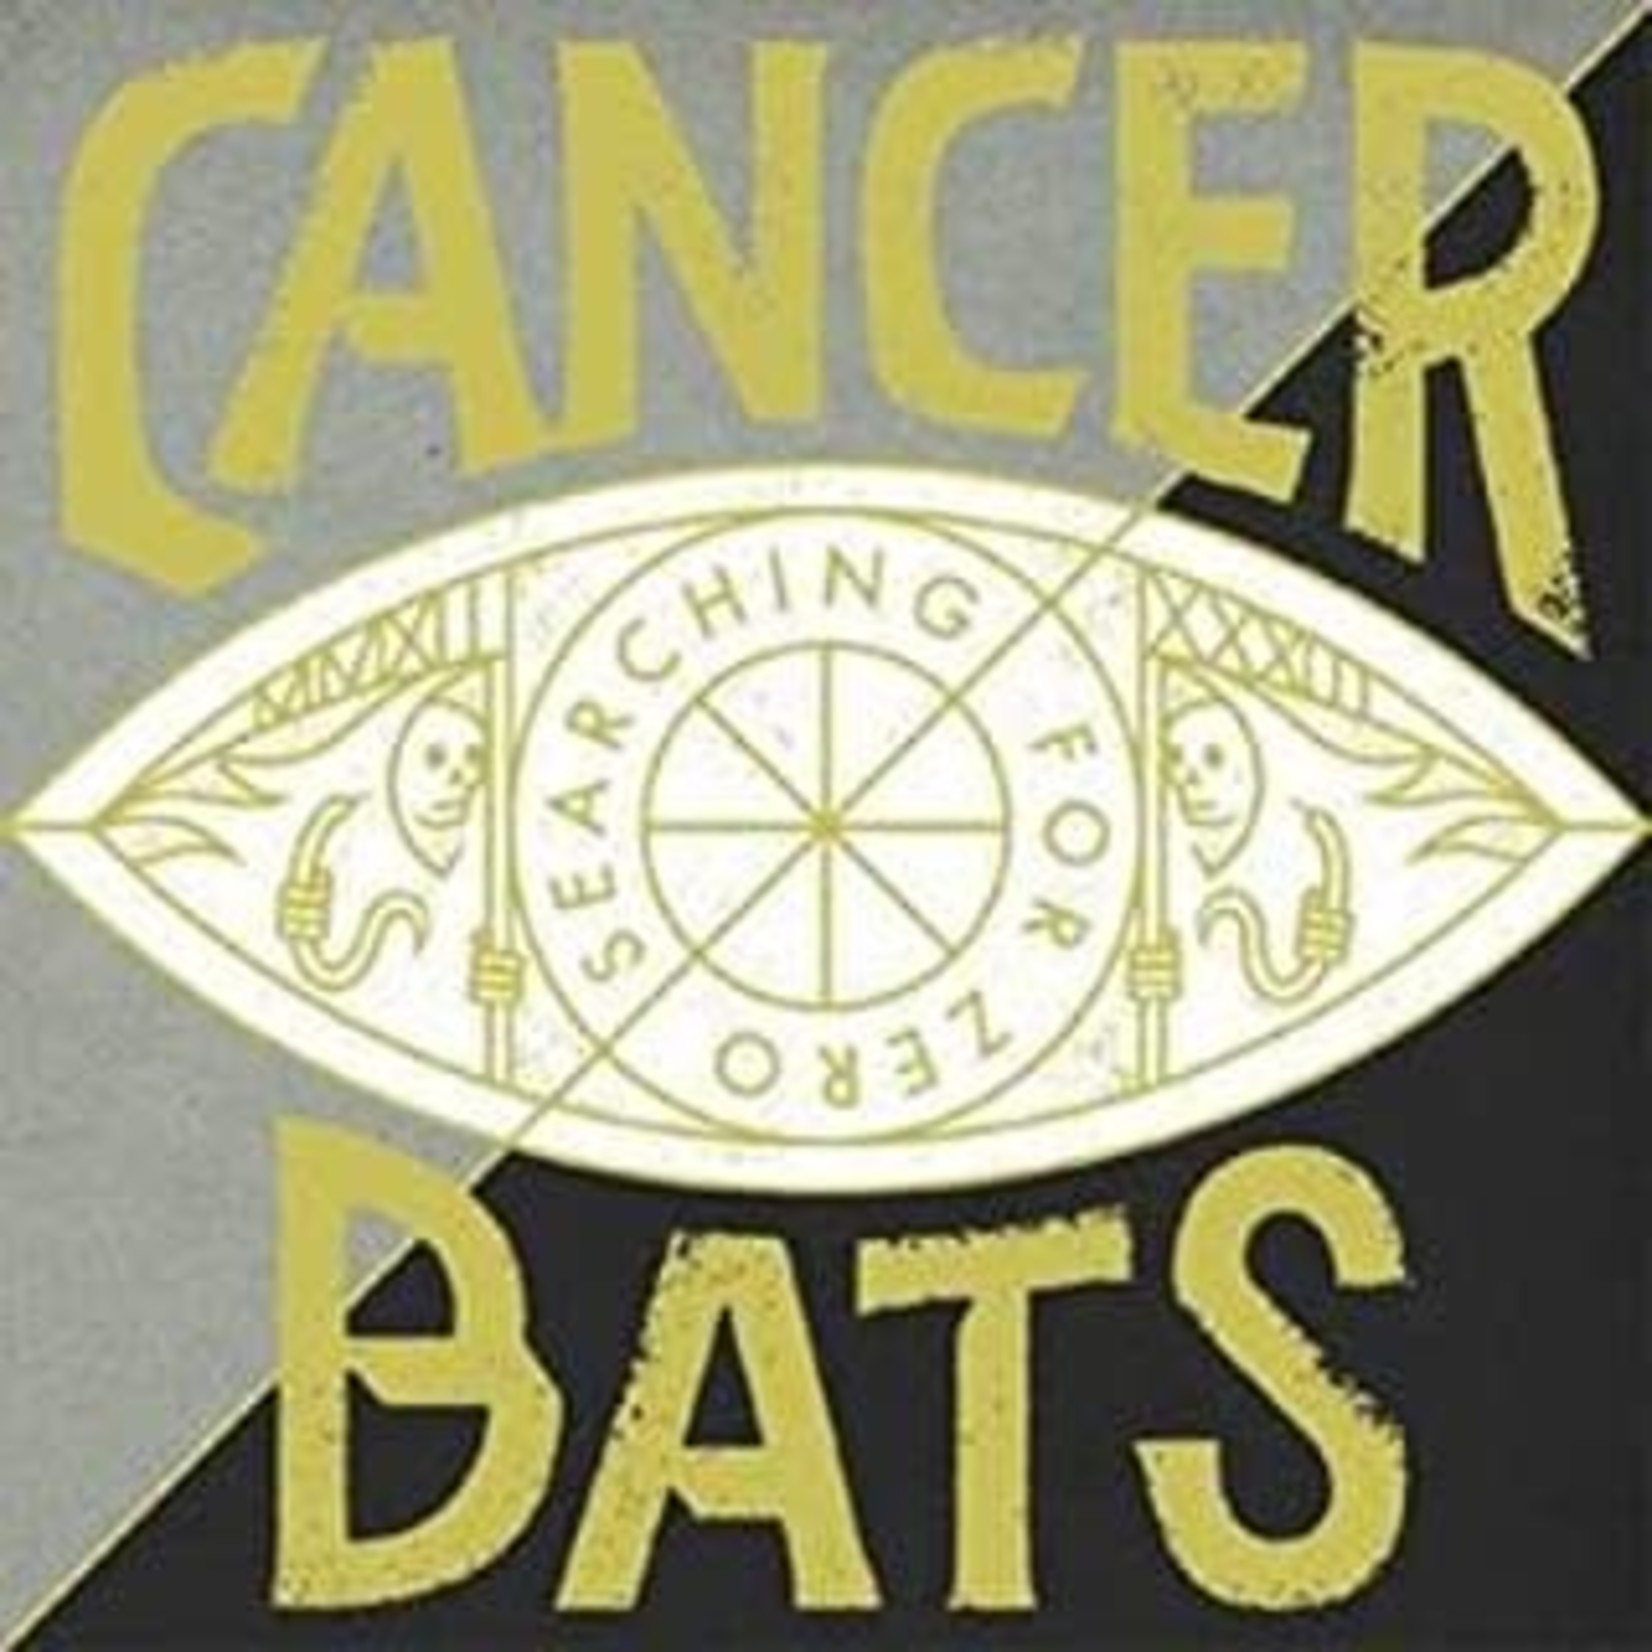 Cancer Bats - Searching For Zero [USED CD]